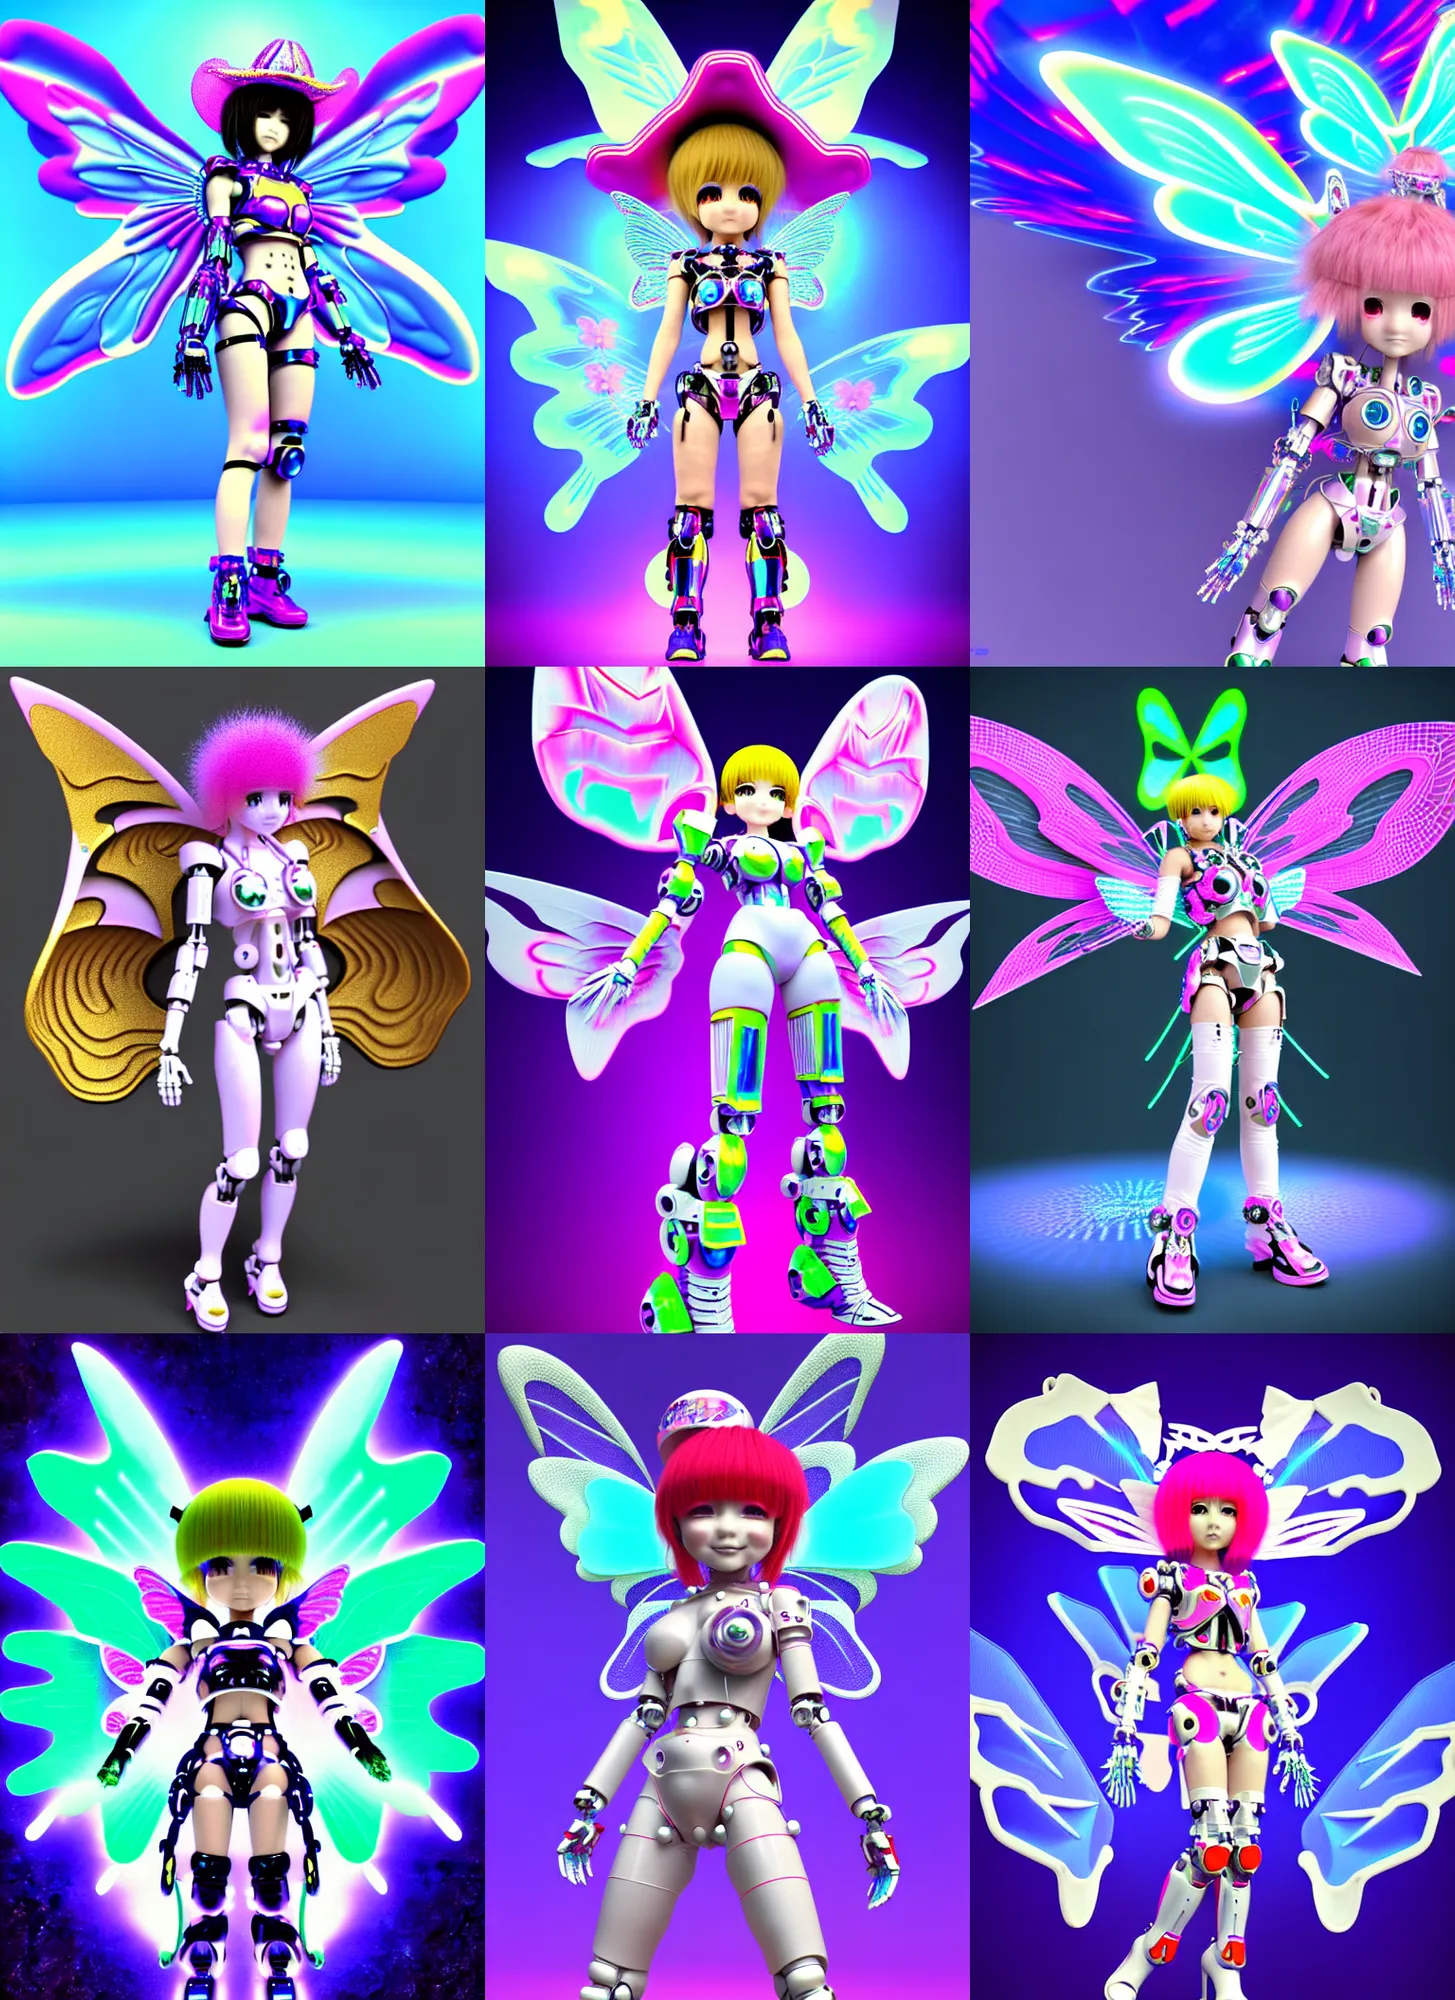 Prompt: 3d render of chibi raver cyborg mecha fairy angel in the style of Ichiro Tanida wearing a big cowboy hat and wearing angel wings against a psychedelic swirly background with 3d rendered butterflies and 3d rendered flowers n the style of 1990's CG graphics 3d rendered y2K aesthetic by Ichiro Tanida, 3DO magazine